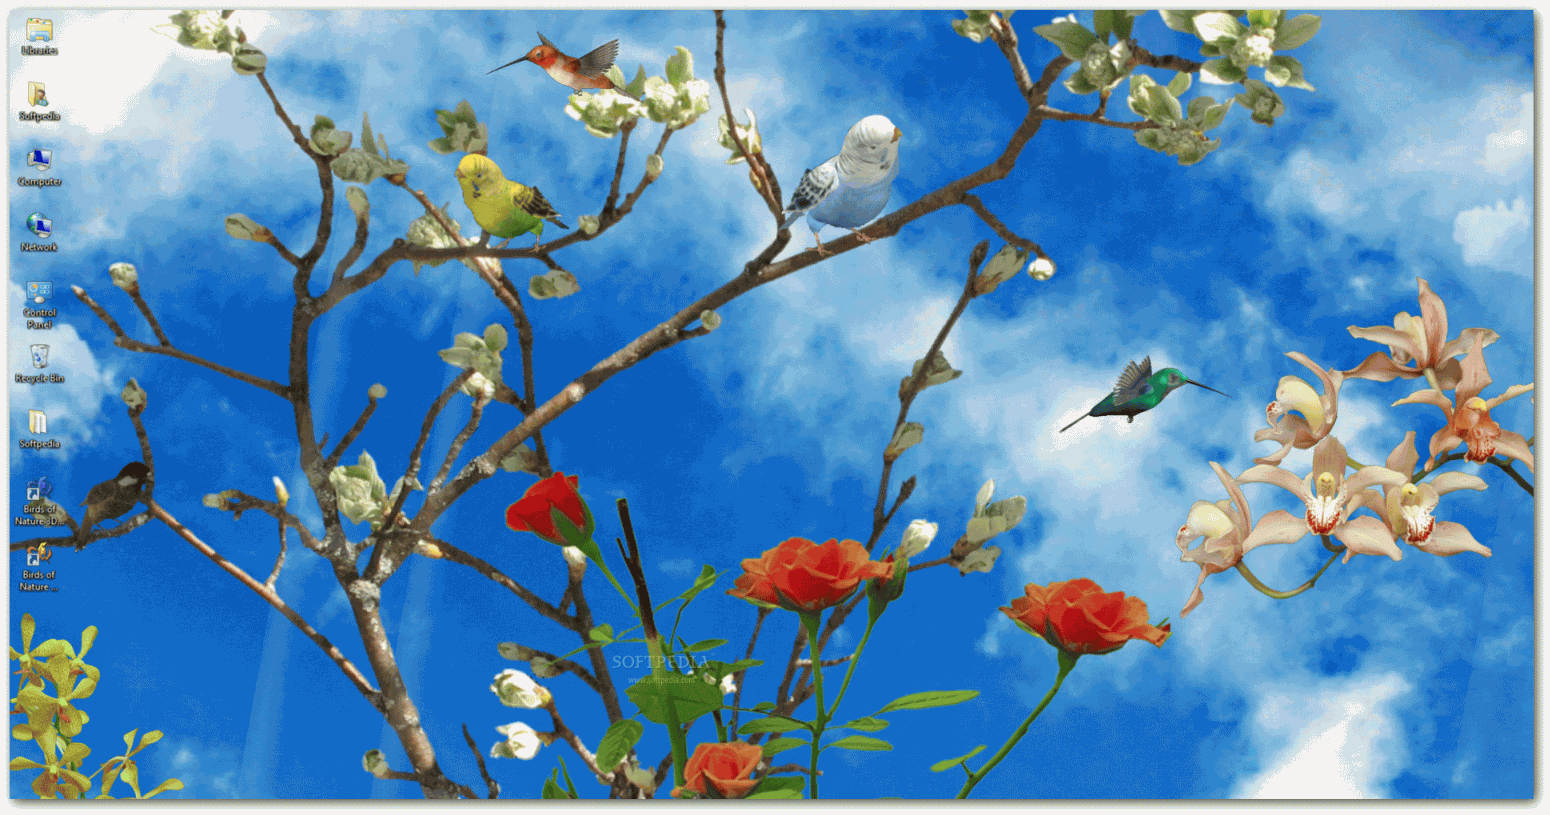 of Nature 3D   This is how the Birds of Nature 3D animated wallpaper